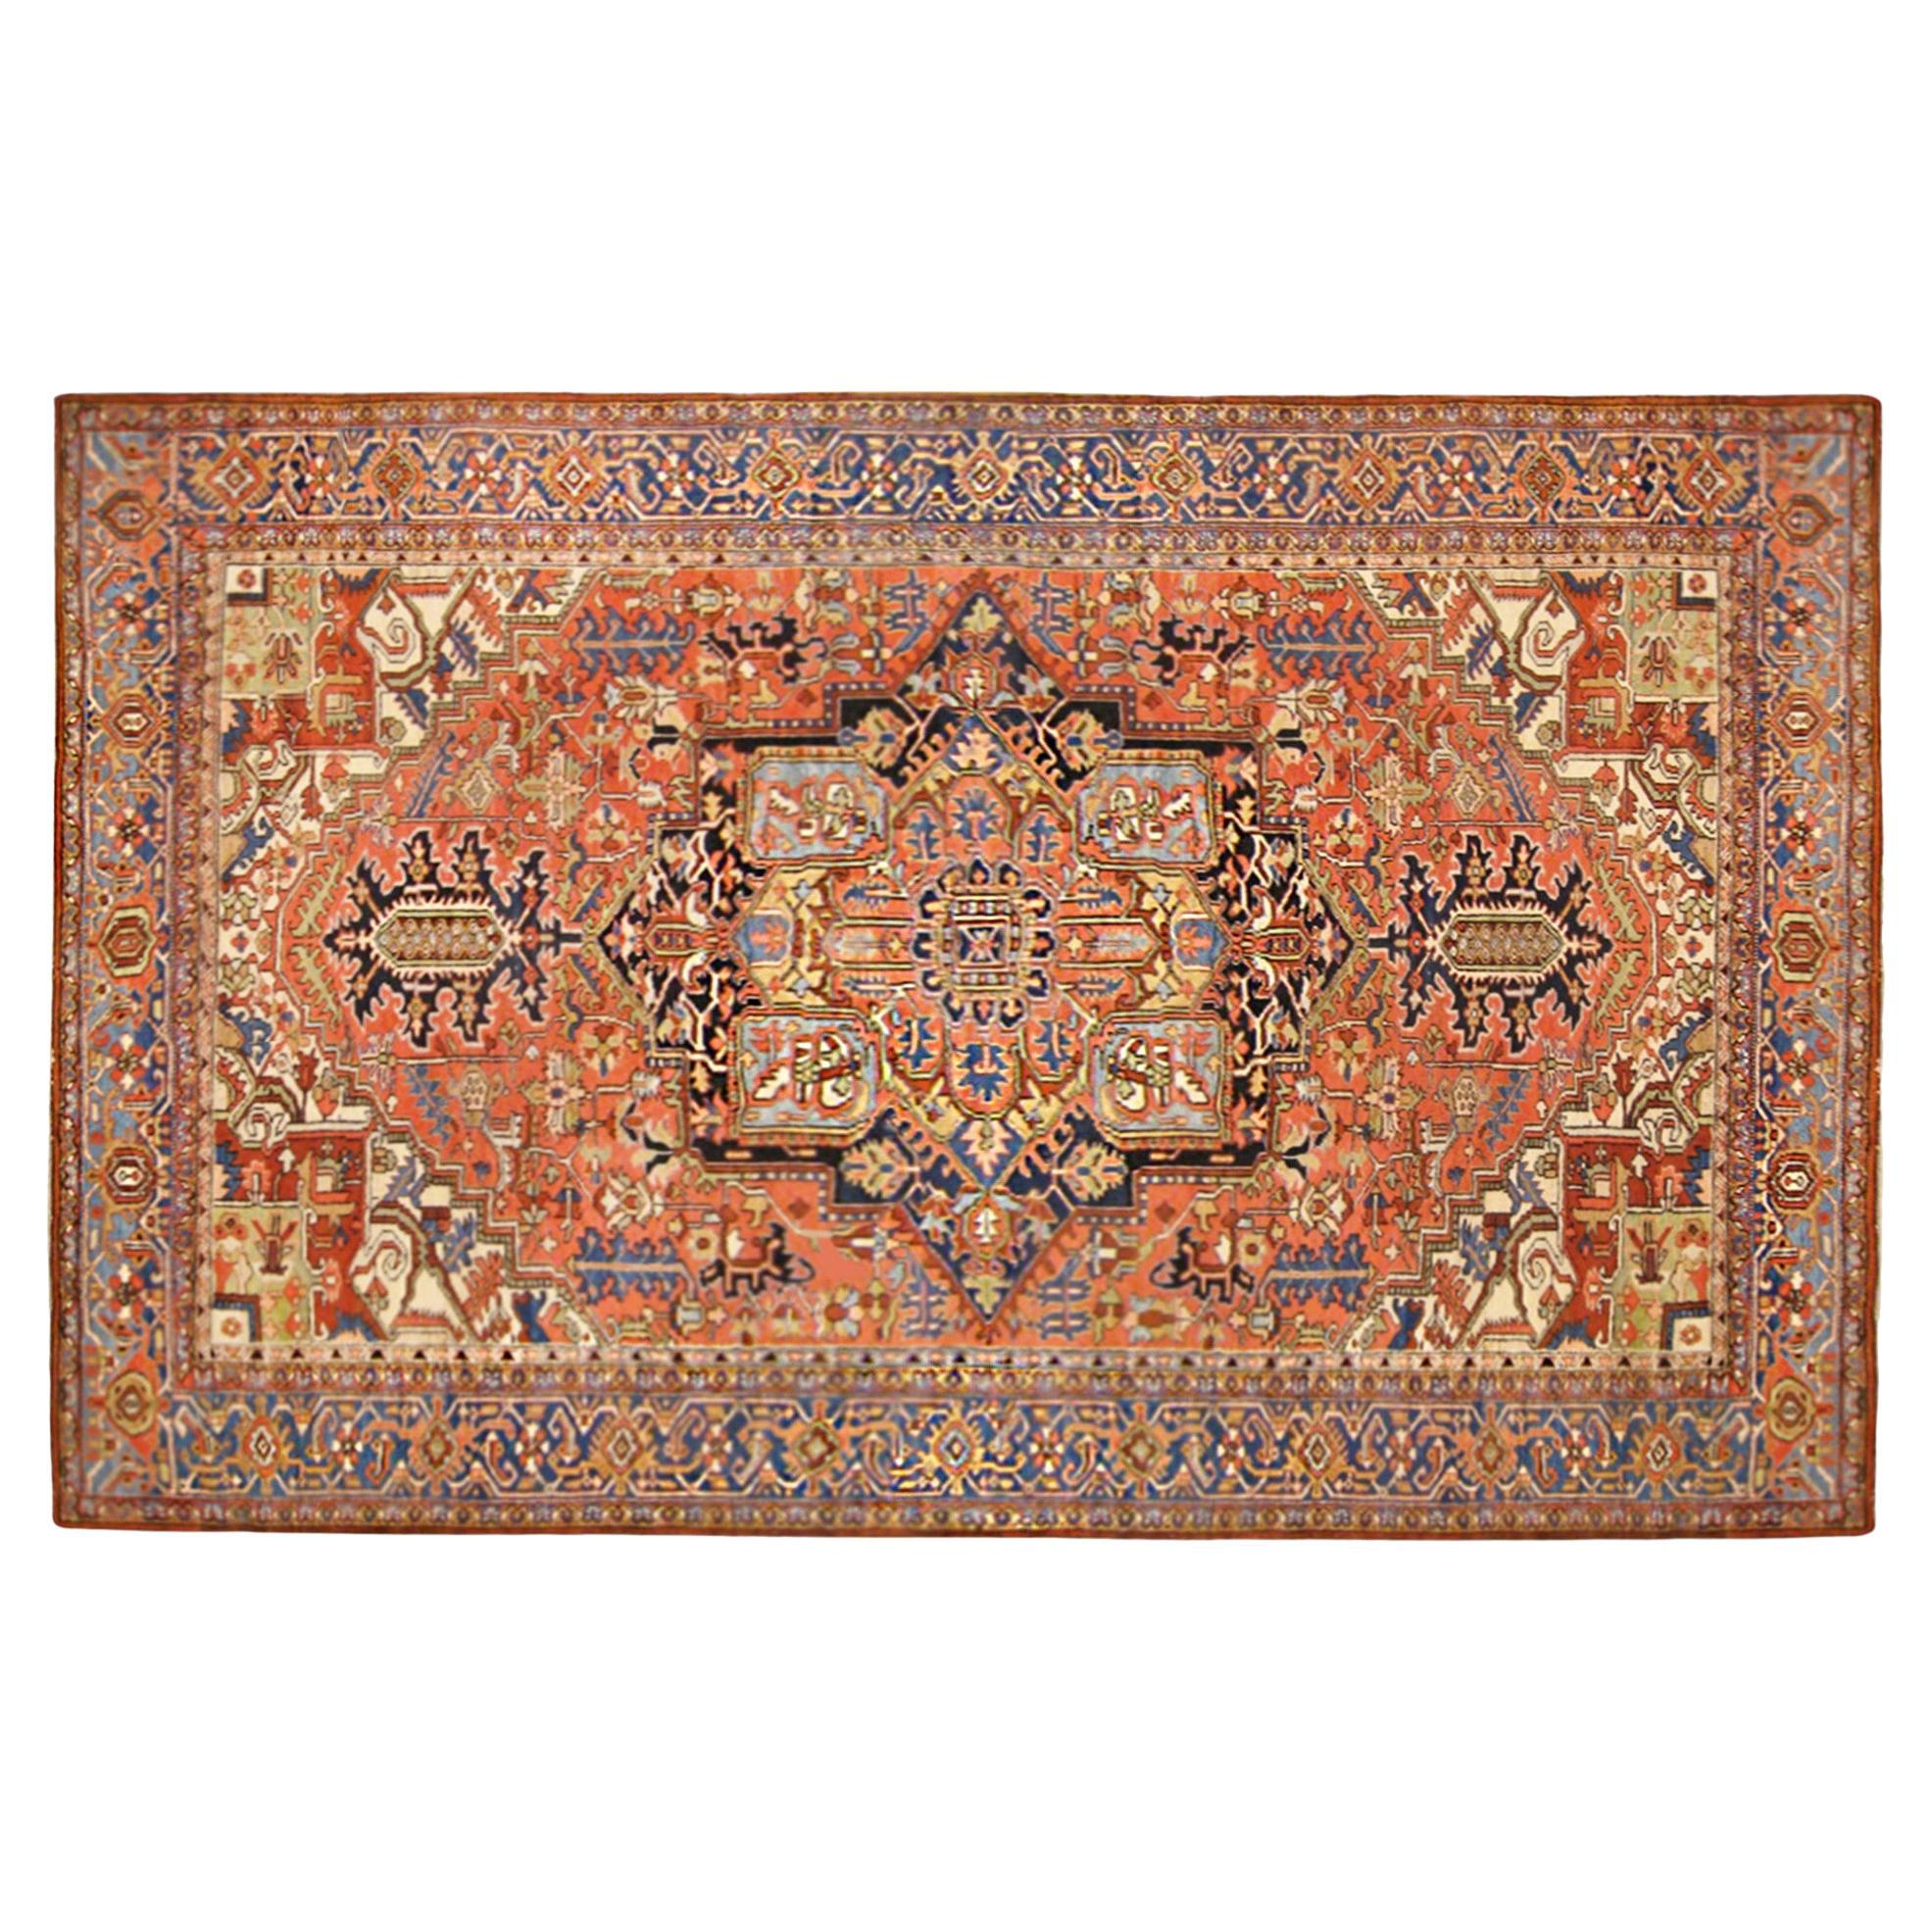 Antique Hand-Knotted Persian Heriz Oriental Carpet